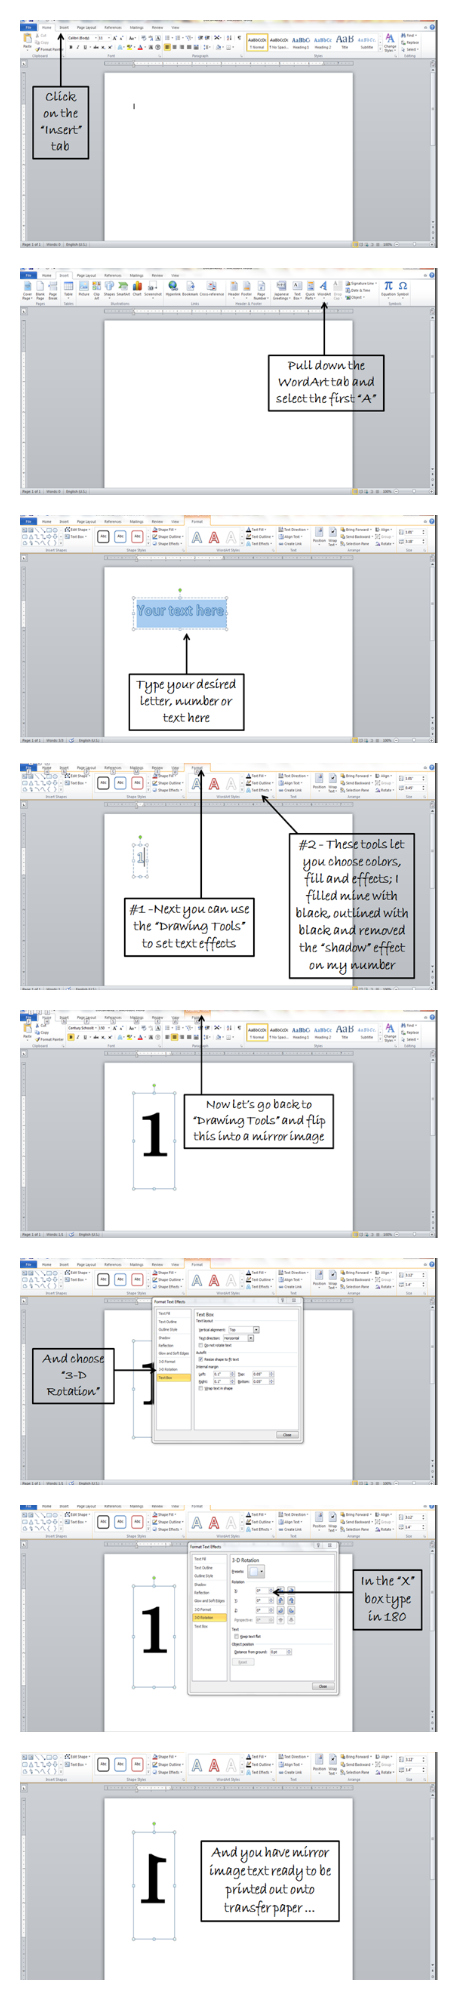 how to print mirror image in word 2011